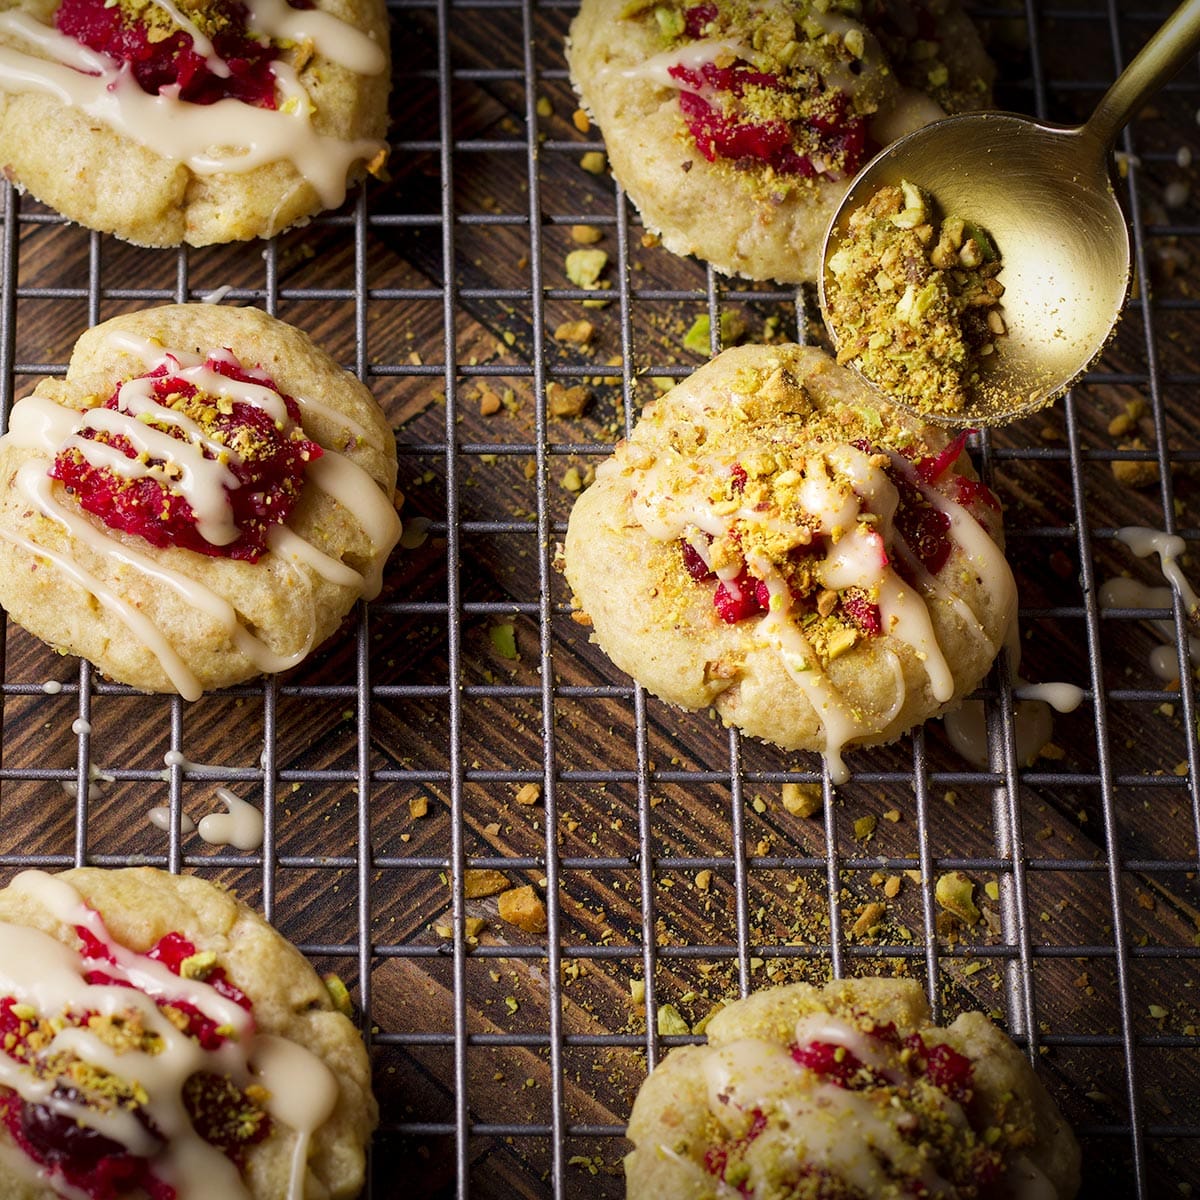 Someone using a gold spoon to sprinkle chopped pistachios over cranberry pistachio cookies.